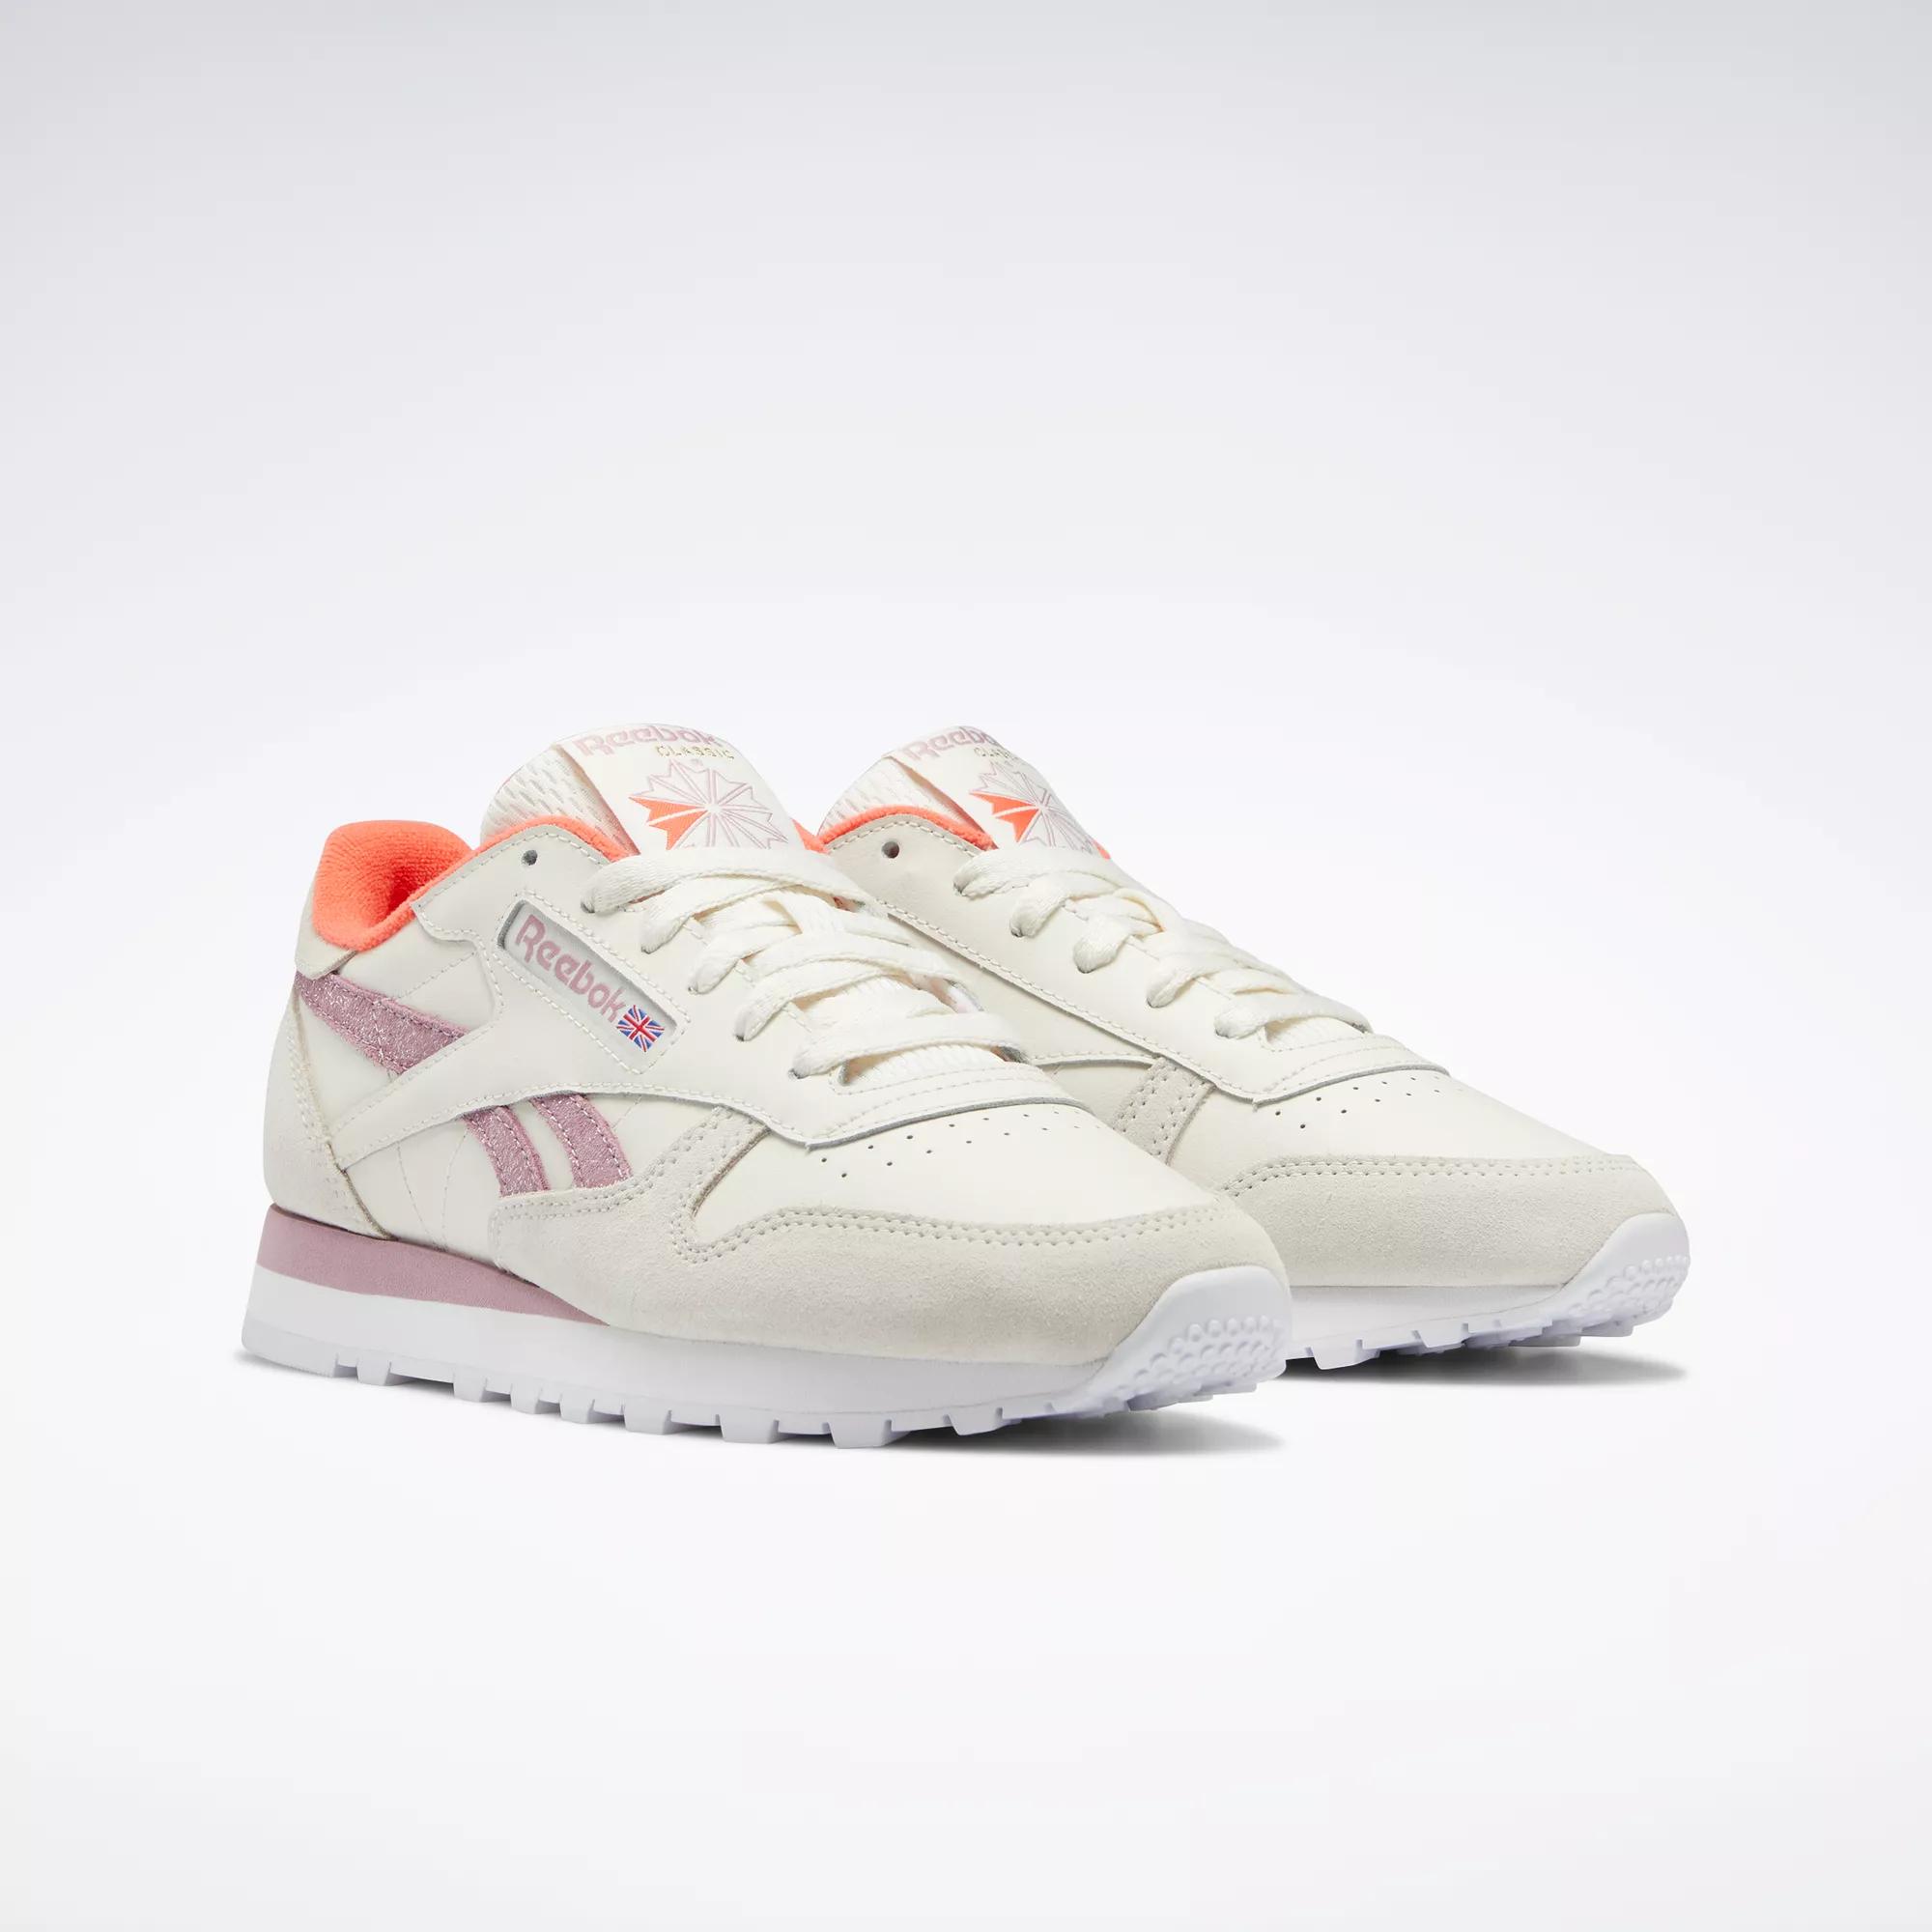 malm hack punktum Classic Leather Women's Shoes - Chalk / Infused Lilac / Ftwr White | Reebok